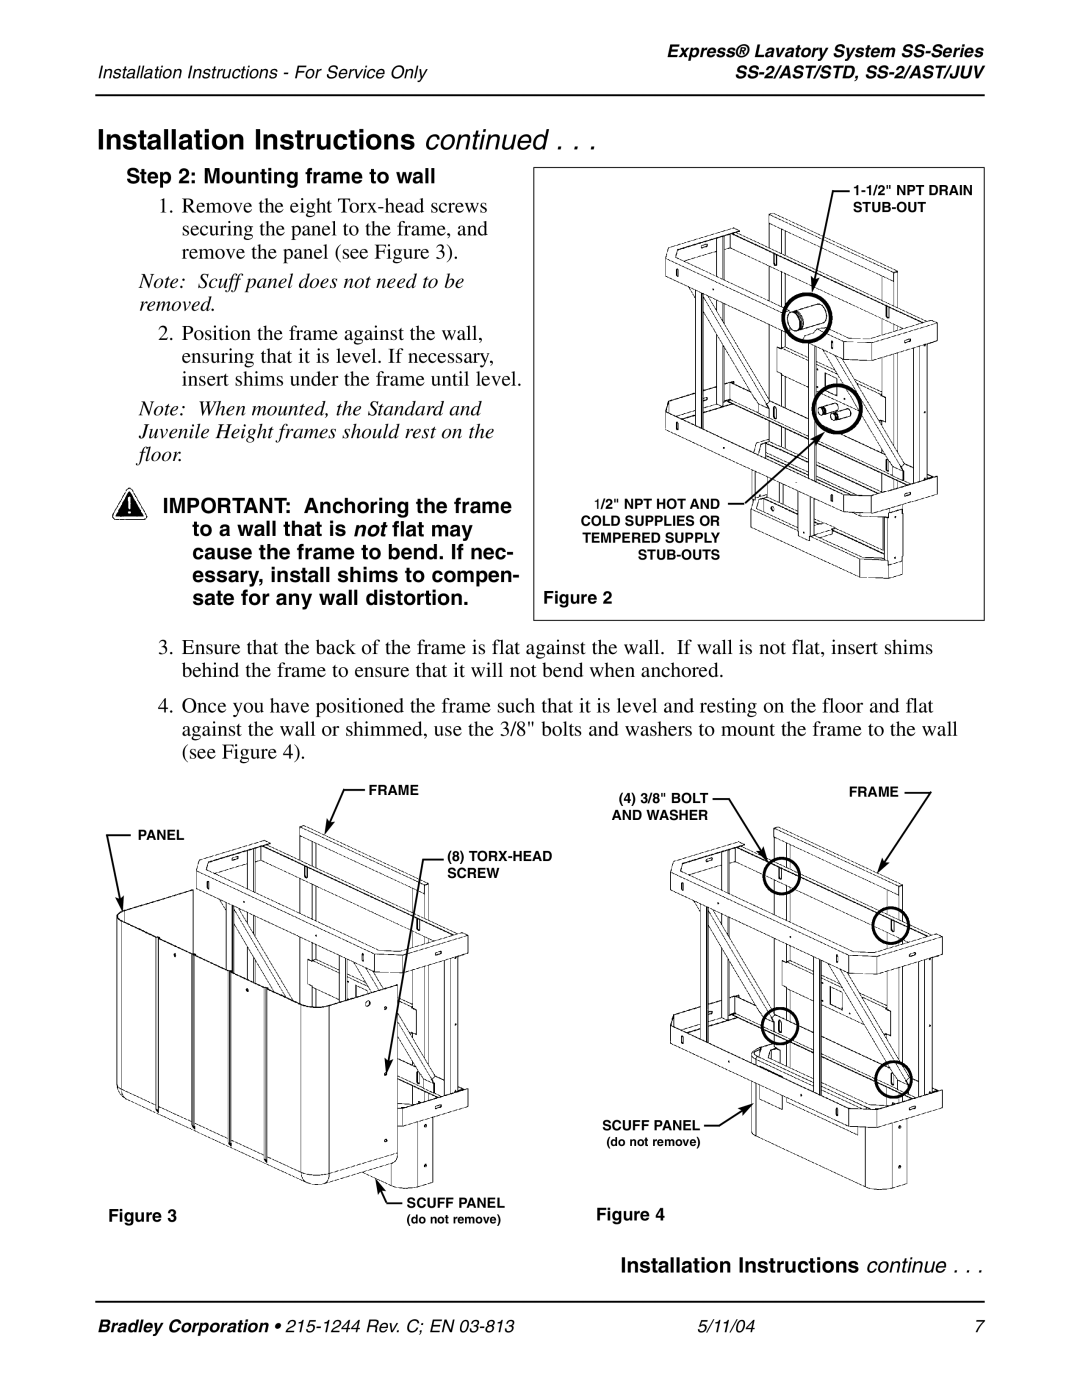 Bradley Smoker SS-2/AST/JUV, SS-2/AST/STD installation instructions Mounting frame to wall 